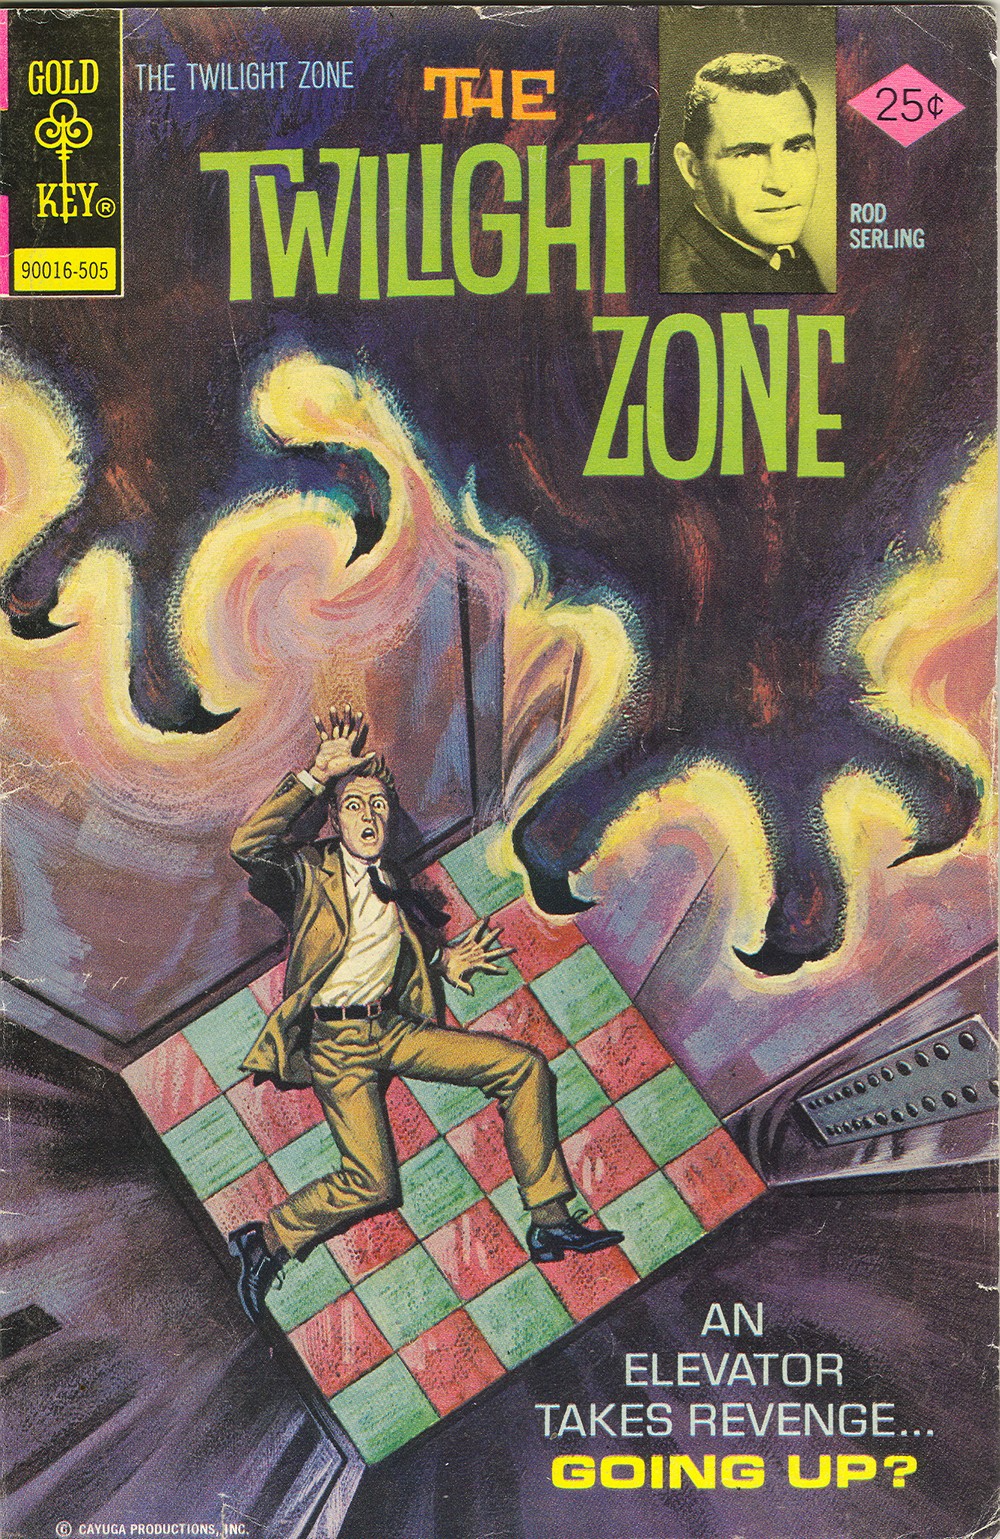 The Twilight Zone 63 | Read The Twilight Zone 63 comic online in high  quality. Read Full Comic online for free - Read comics online in high  quality .| READ COMIC ONLINE